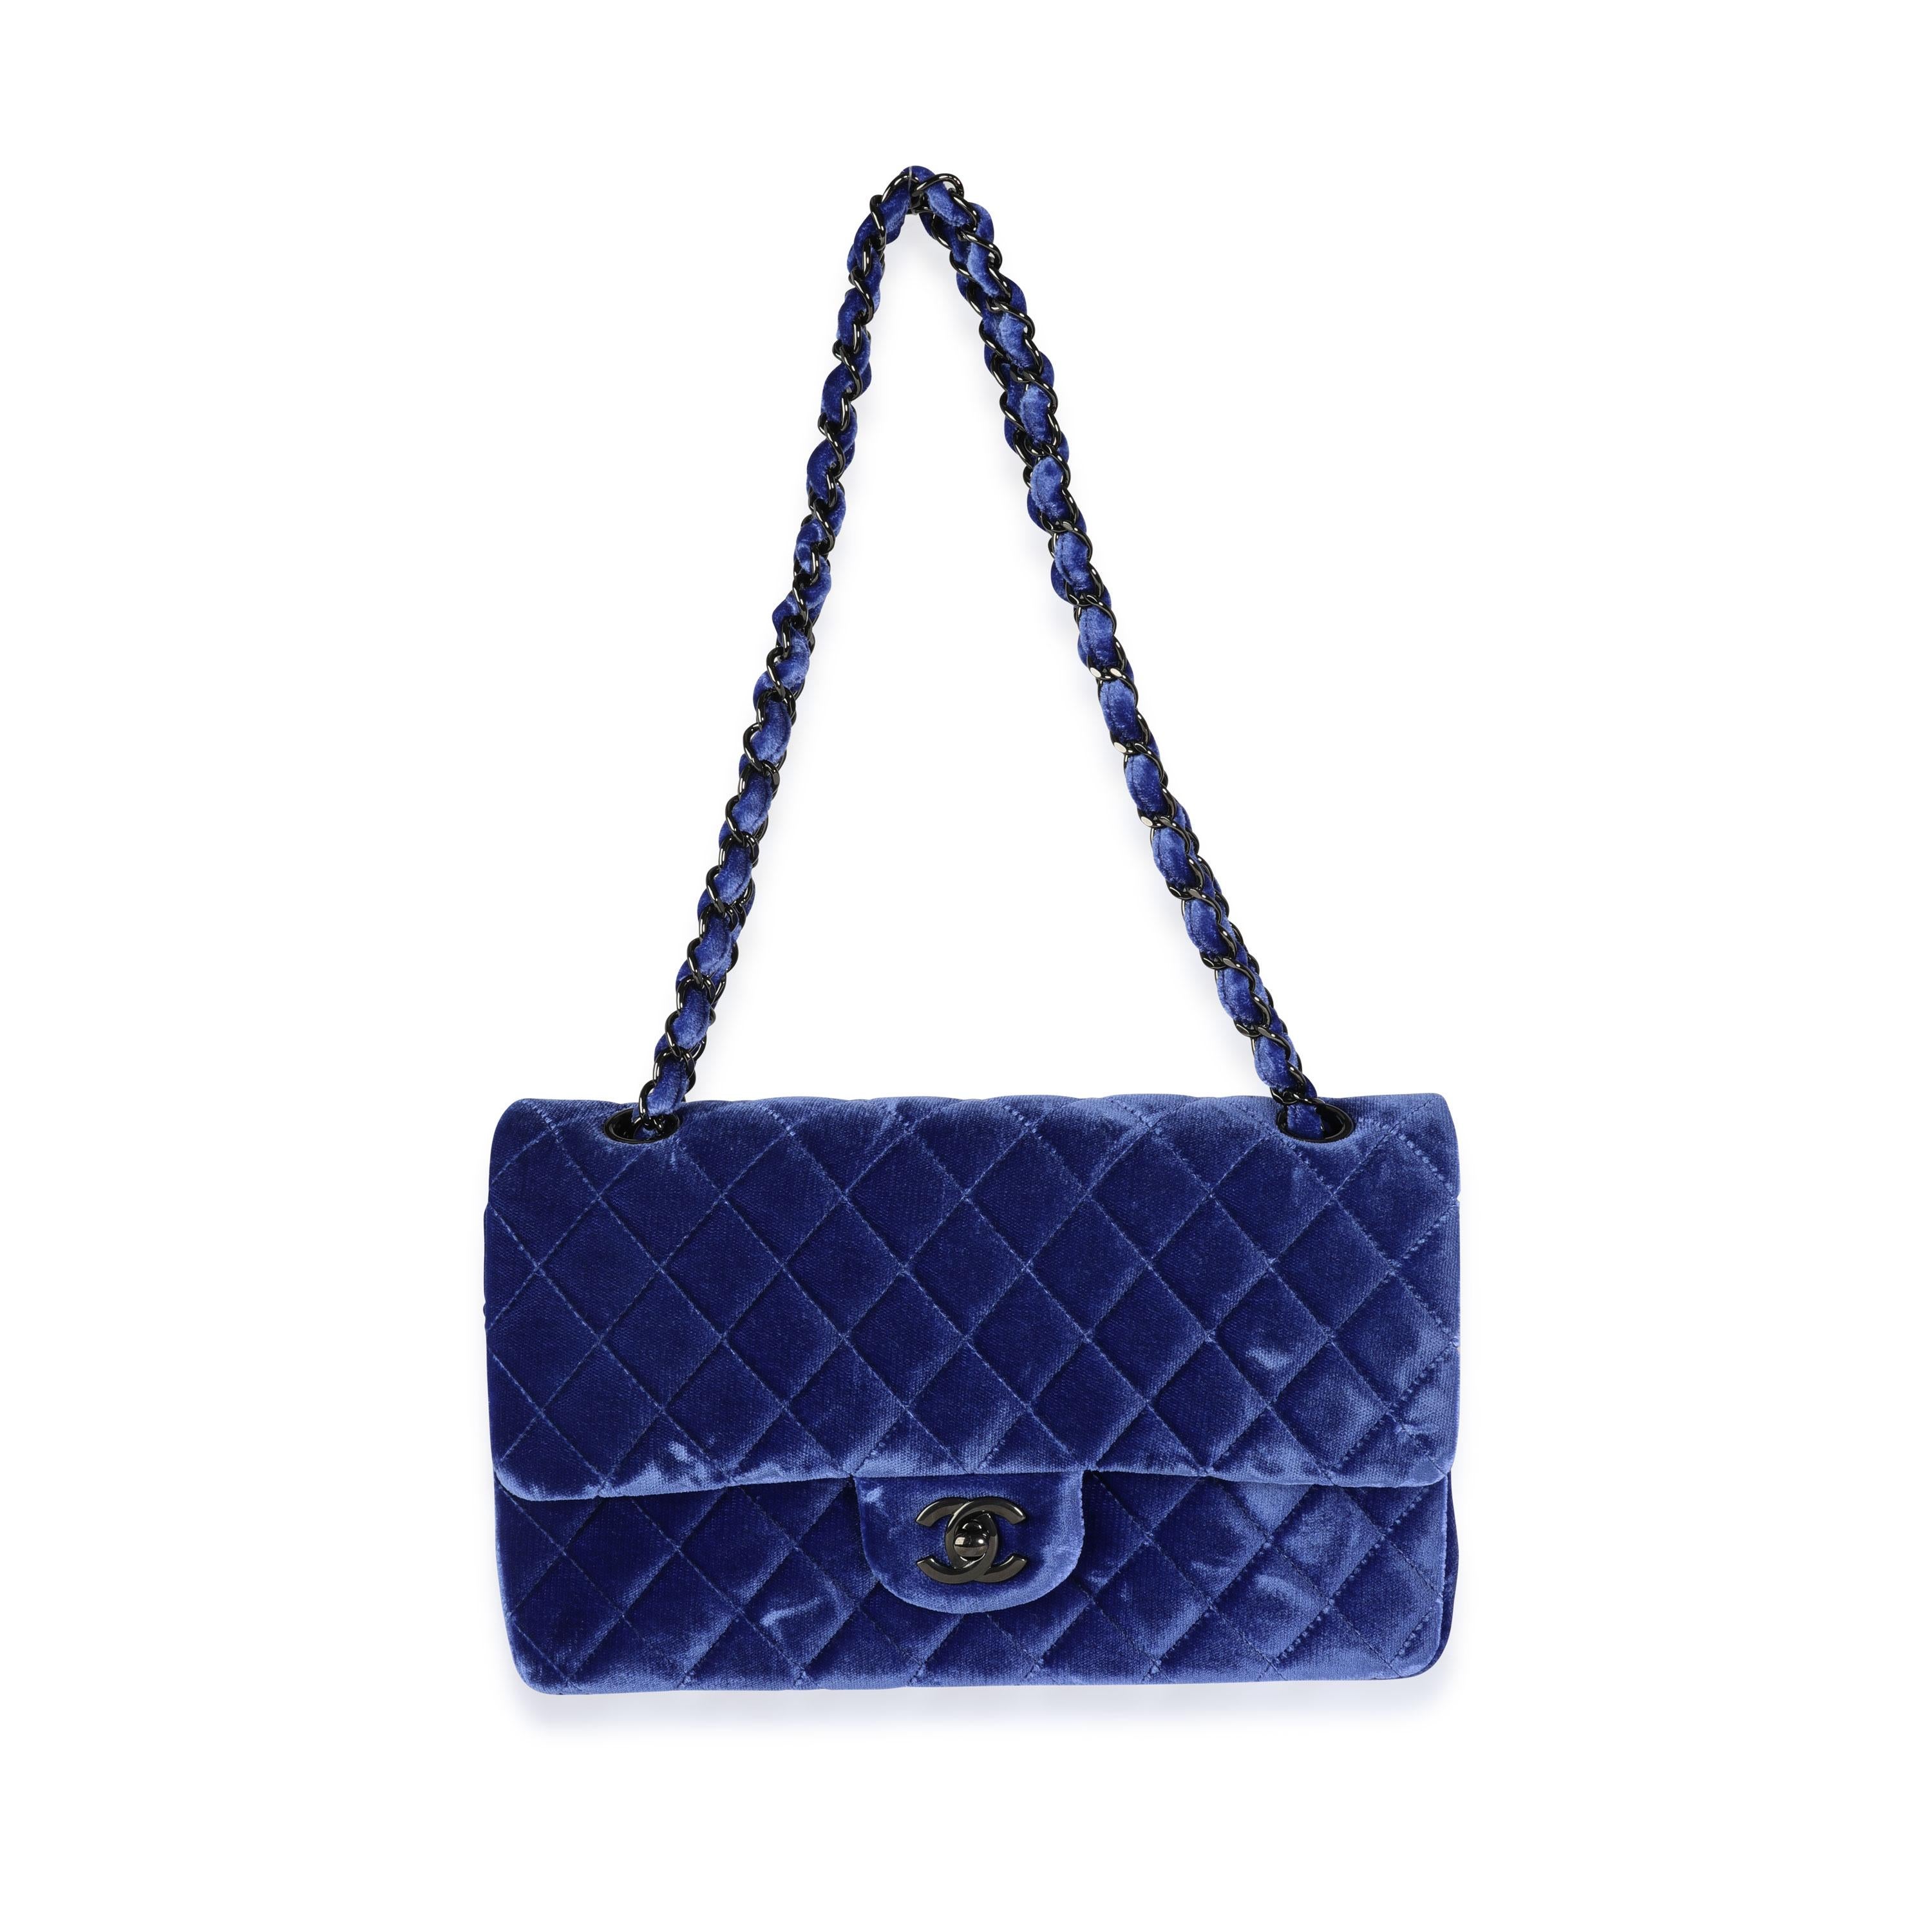 Listing Title: Chanel Blue Quilted Velvet Medium Classic Double Flap Bag
SKU: 115027
MSRP: 8800.00
Condition: Pre-owned (3000)
Handbag Condition: Excellent
Condition Comments: Excellent Condition. Faint marks to velvet. No other visible signs of